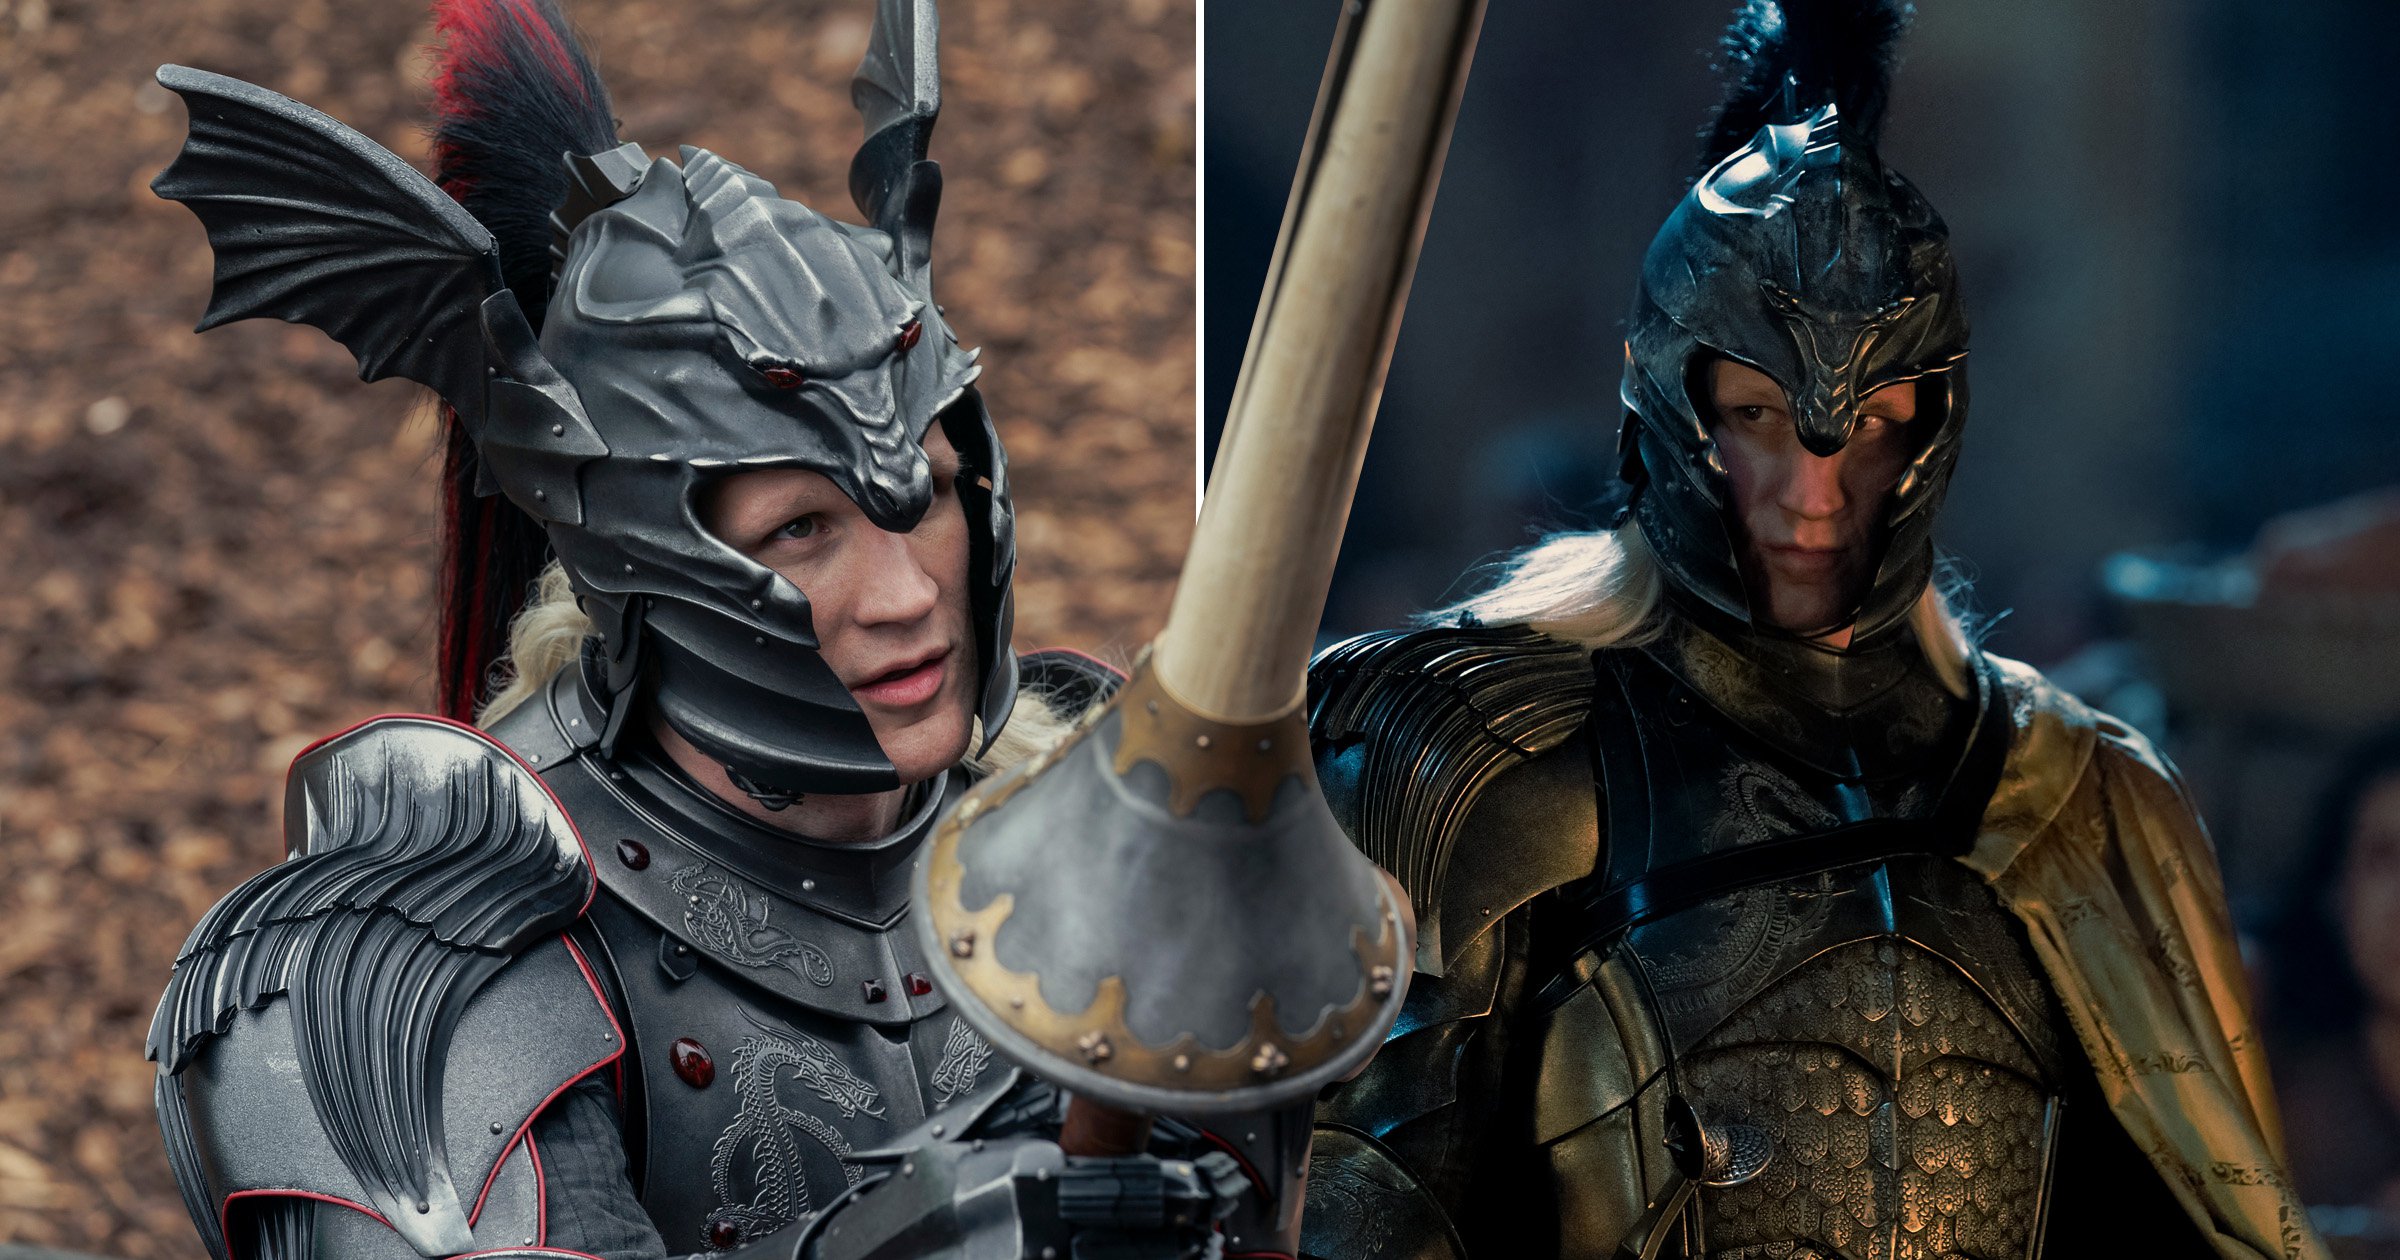 Behind-the-scenes process of creating Matt Smith’s ‘samurai-inspired’ armour and dragon helmet for Prince Daemon Targaryen in House of the Dragon